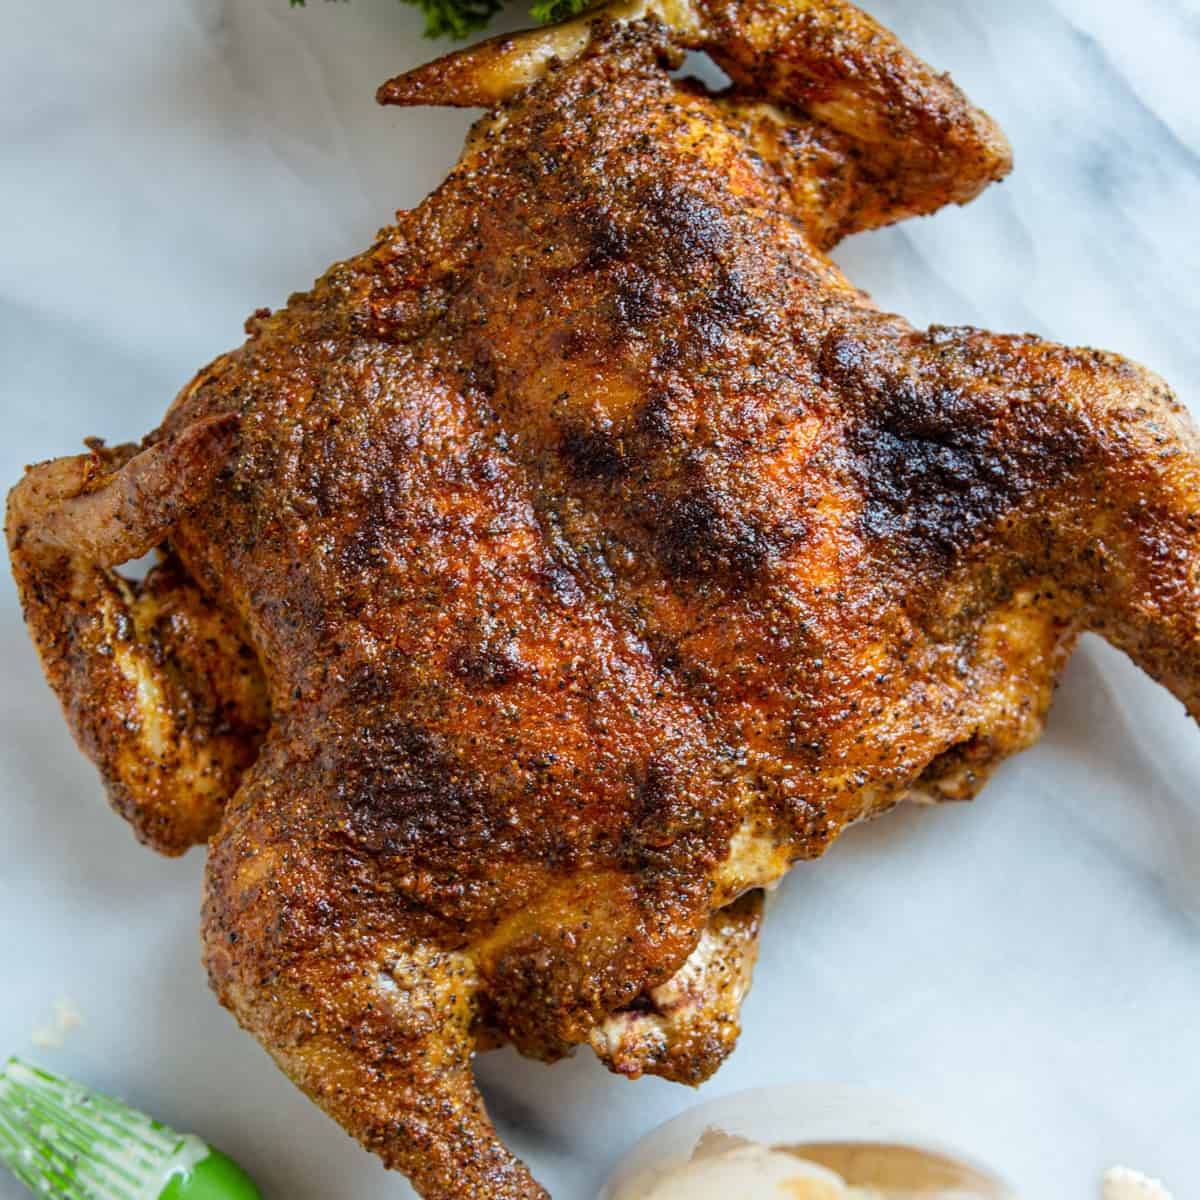 https://keviniscooking.com/wp-content/uploads/2022/05/Spatchcock-Chicken-square.jpg